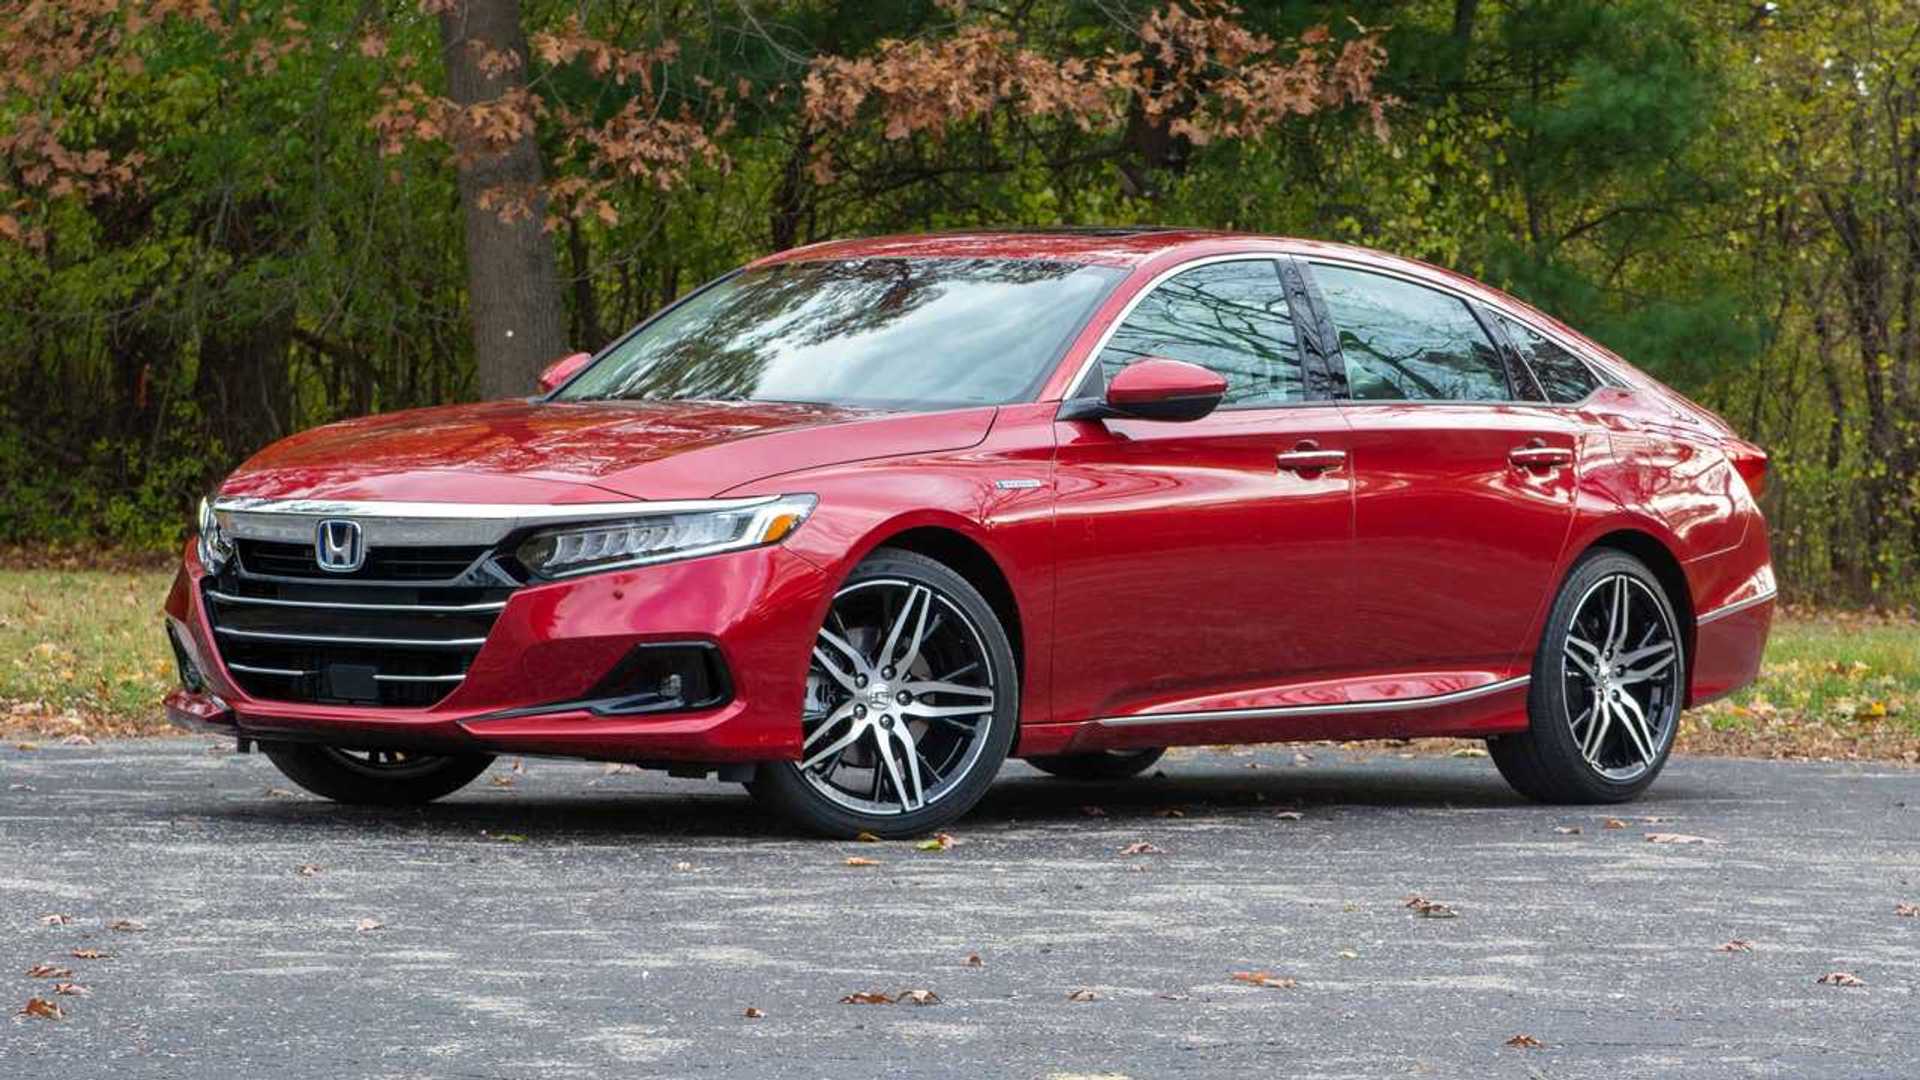 2021 Honda Accord Hybrid First Drive Review: The Hybrid Effect